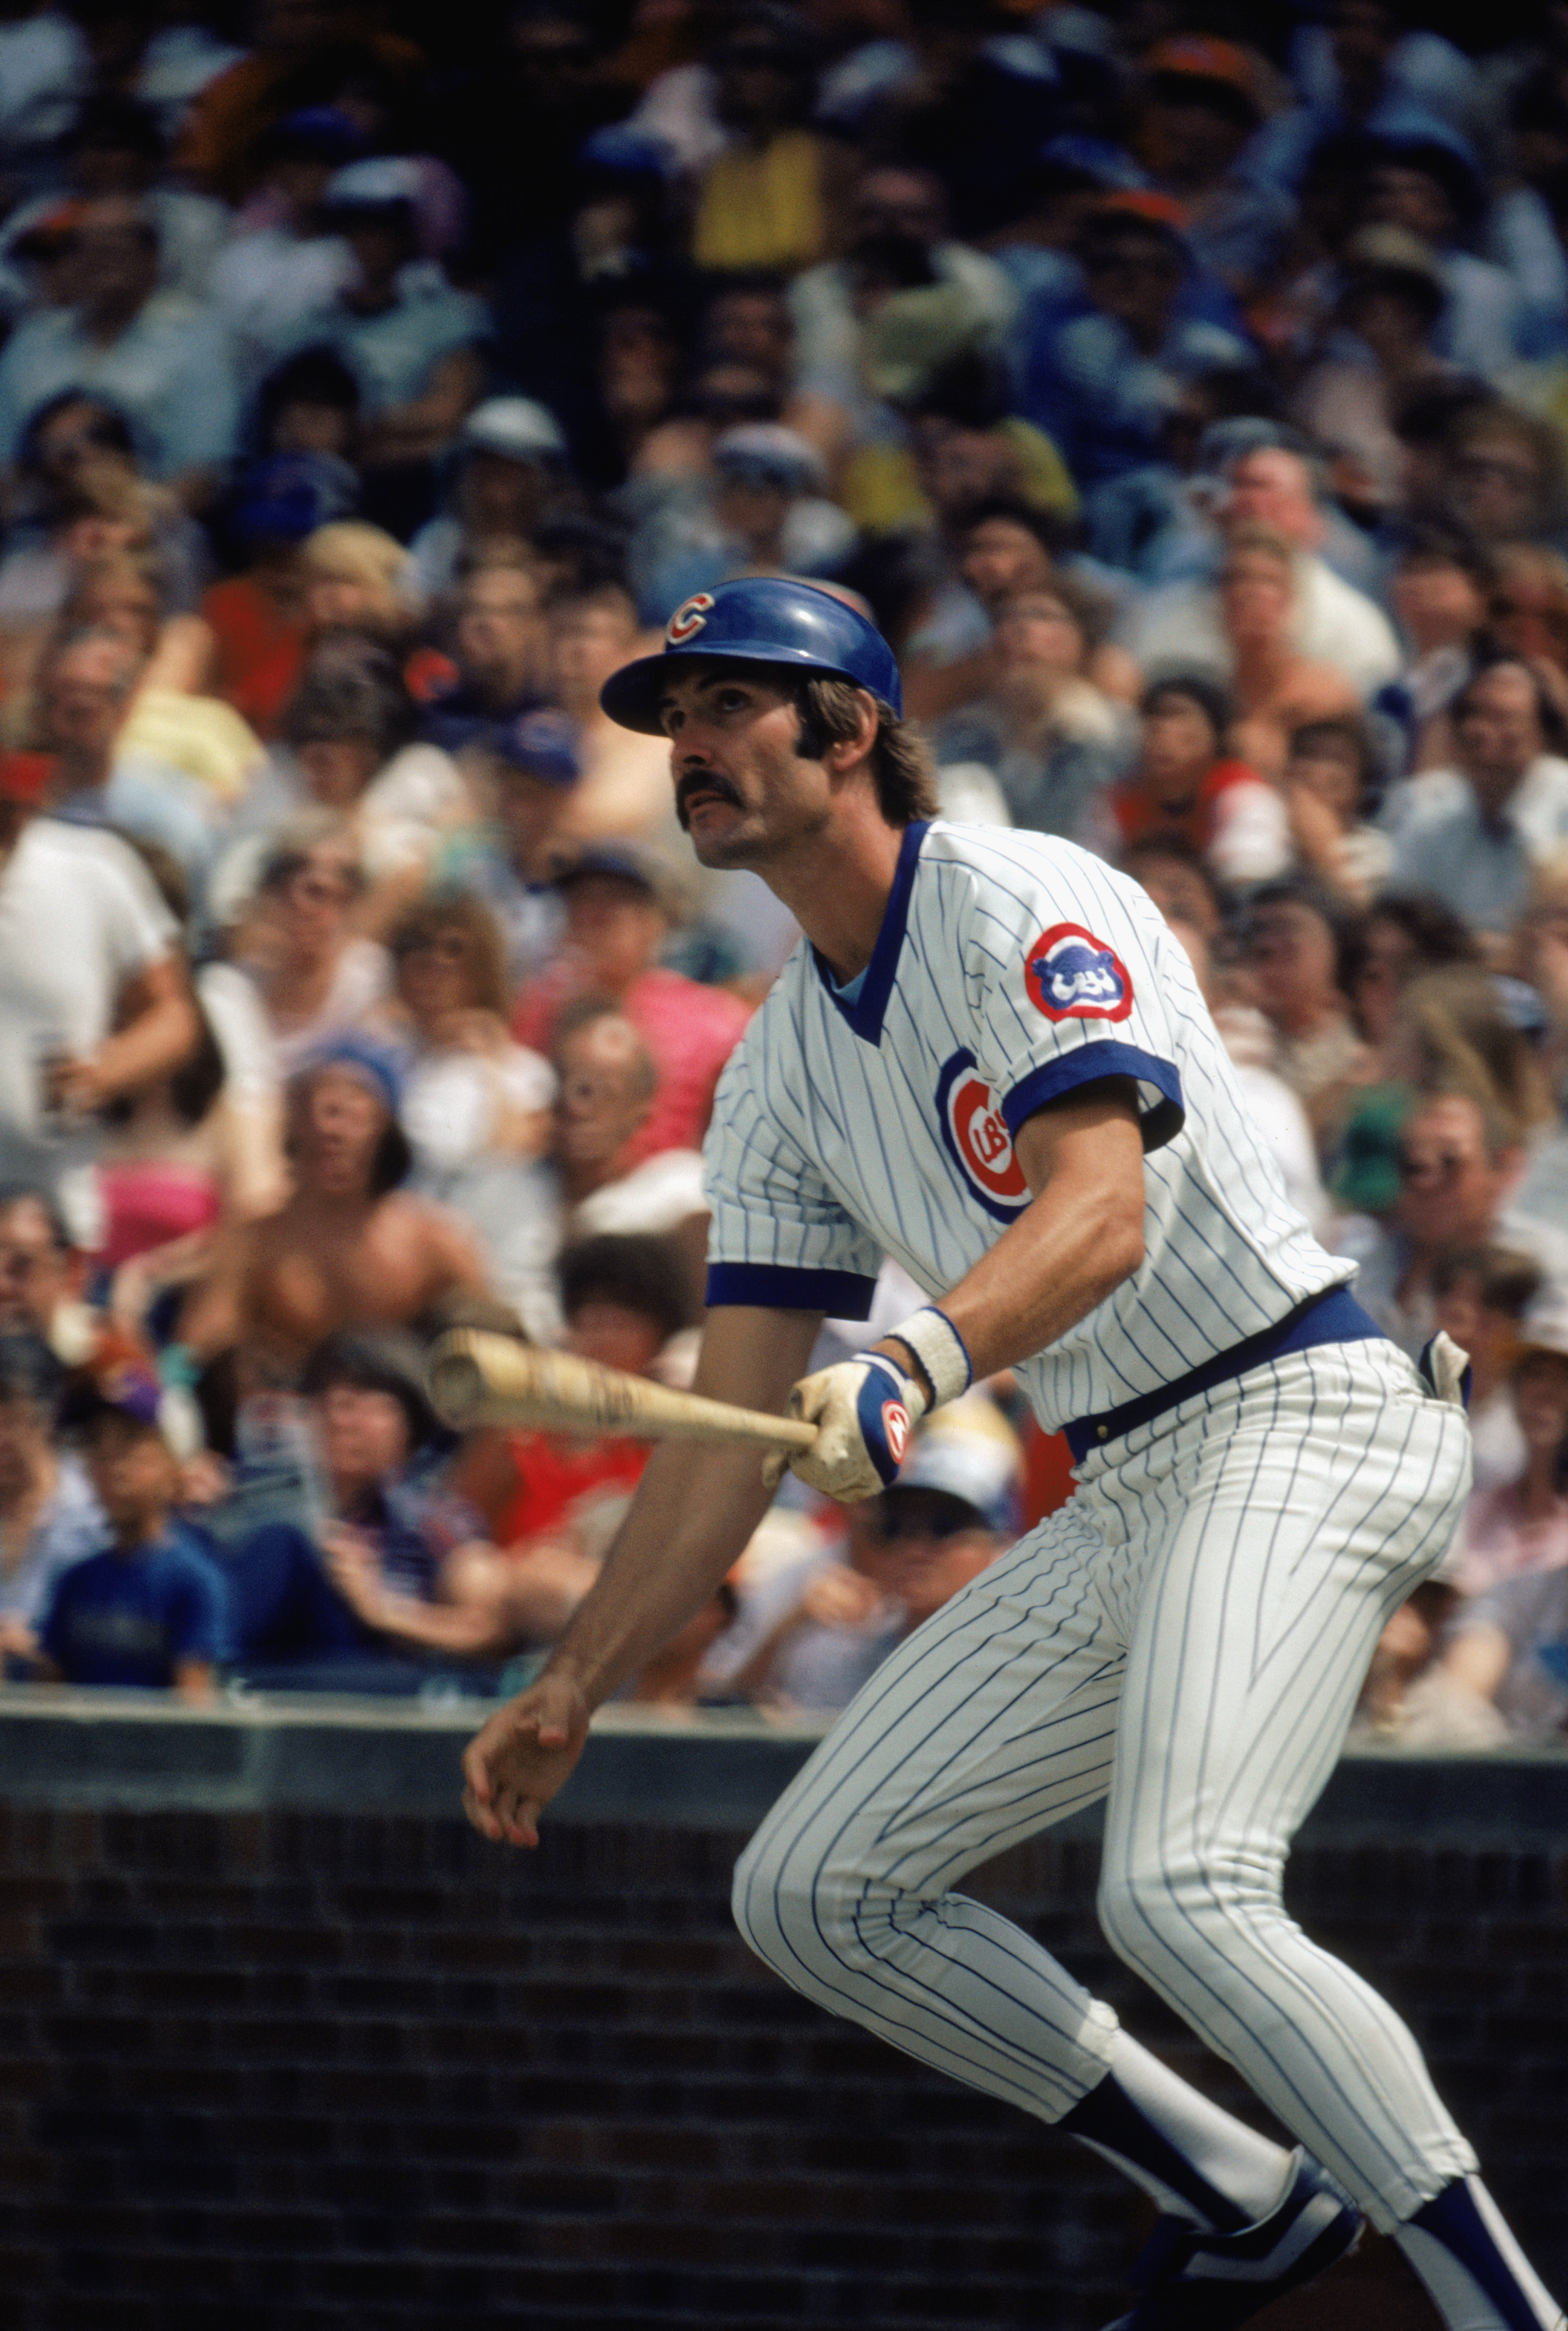 CHICAGO -1980:  Dave Kingman #10 of the Chicago Cubs swings at the pitch during a game in the 1980 season at Wrigley Field in Chicago, Illinois .  (Photo by: Jonathan Daniel/Getty Images)